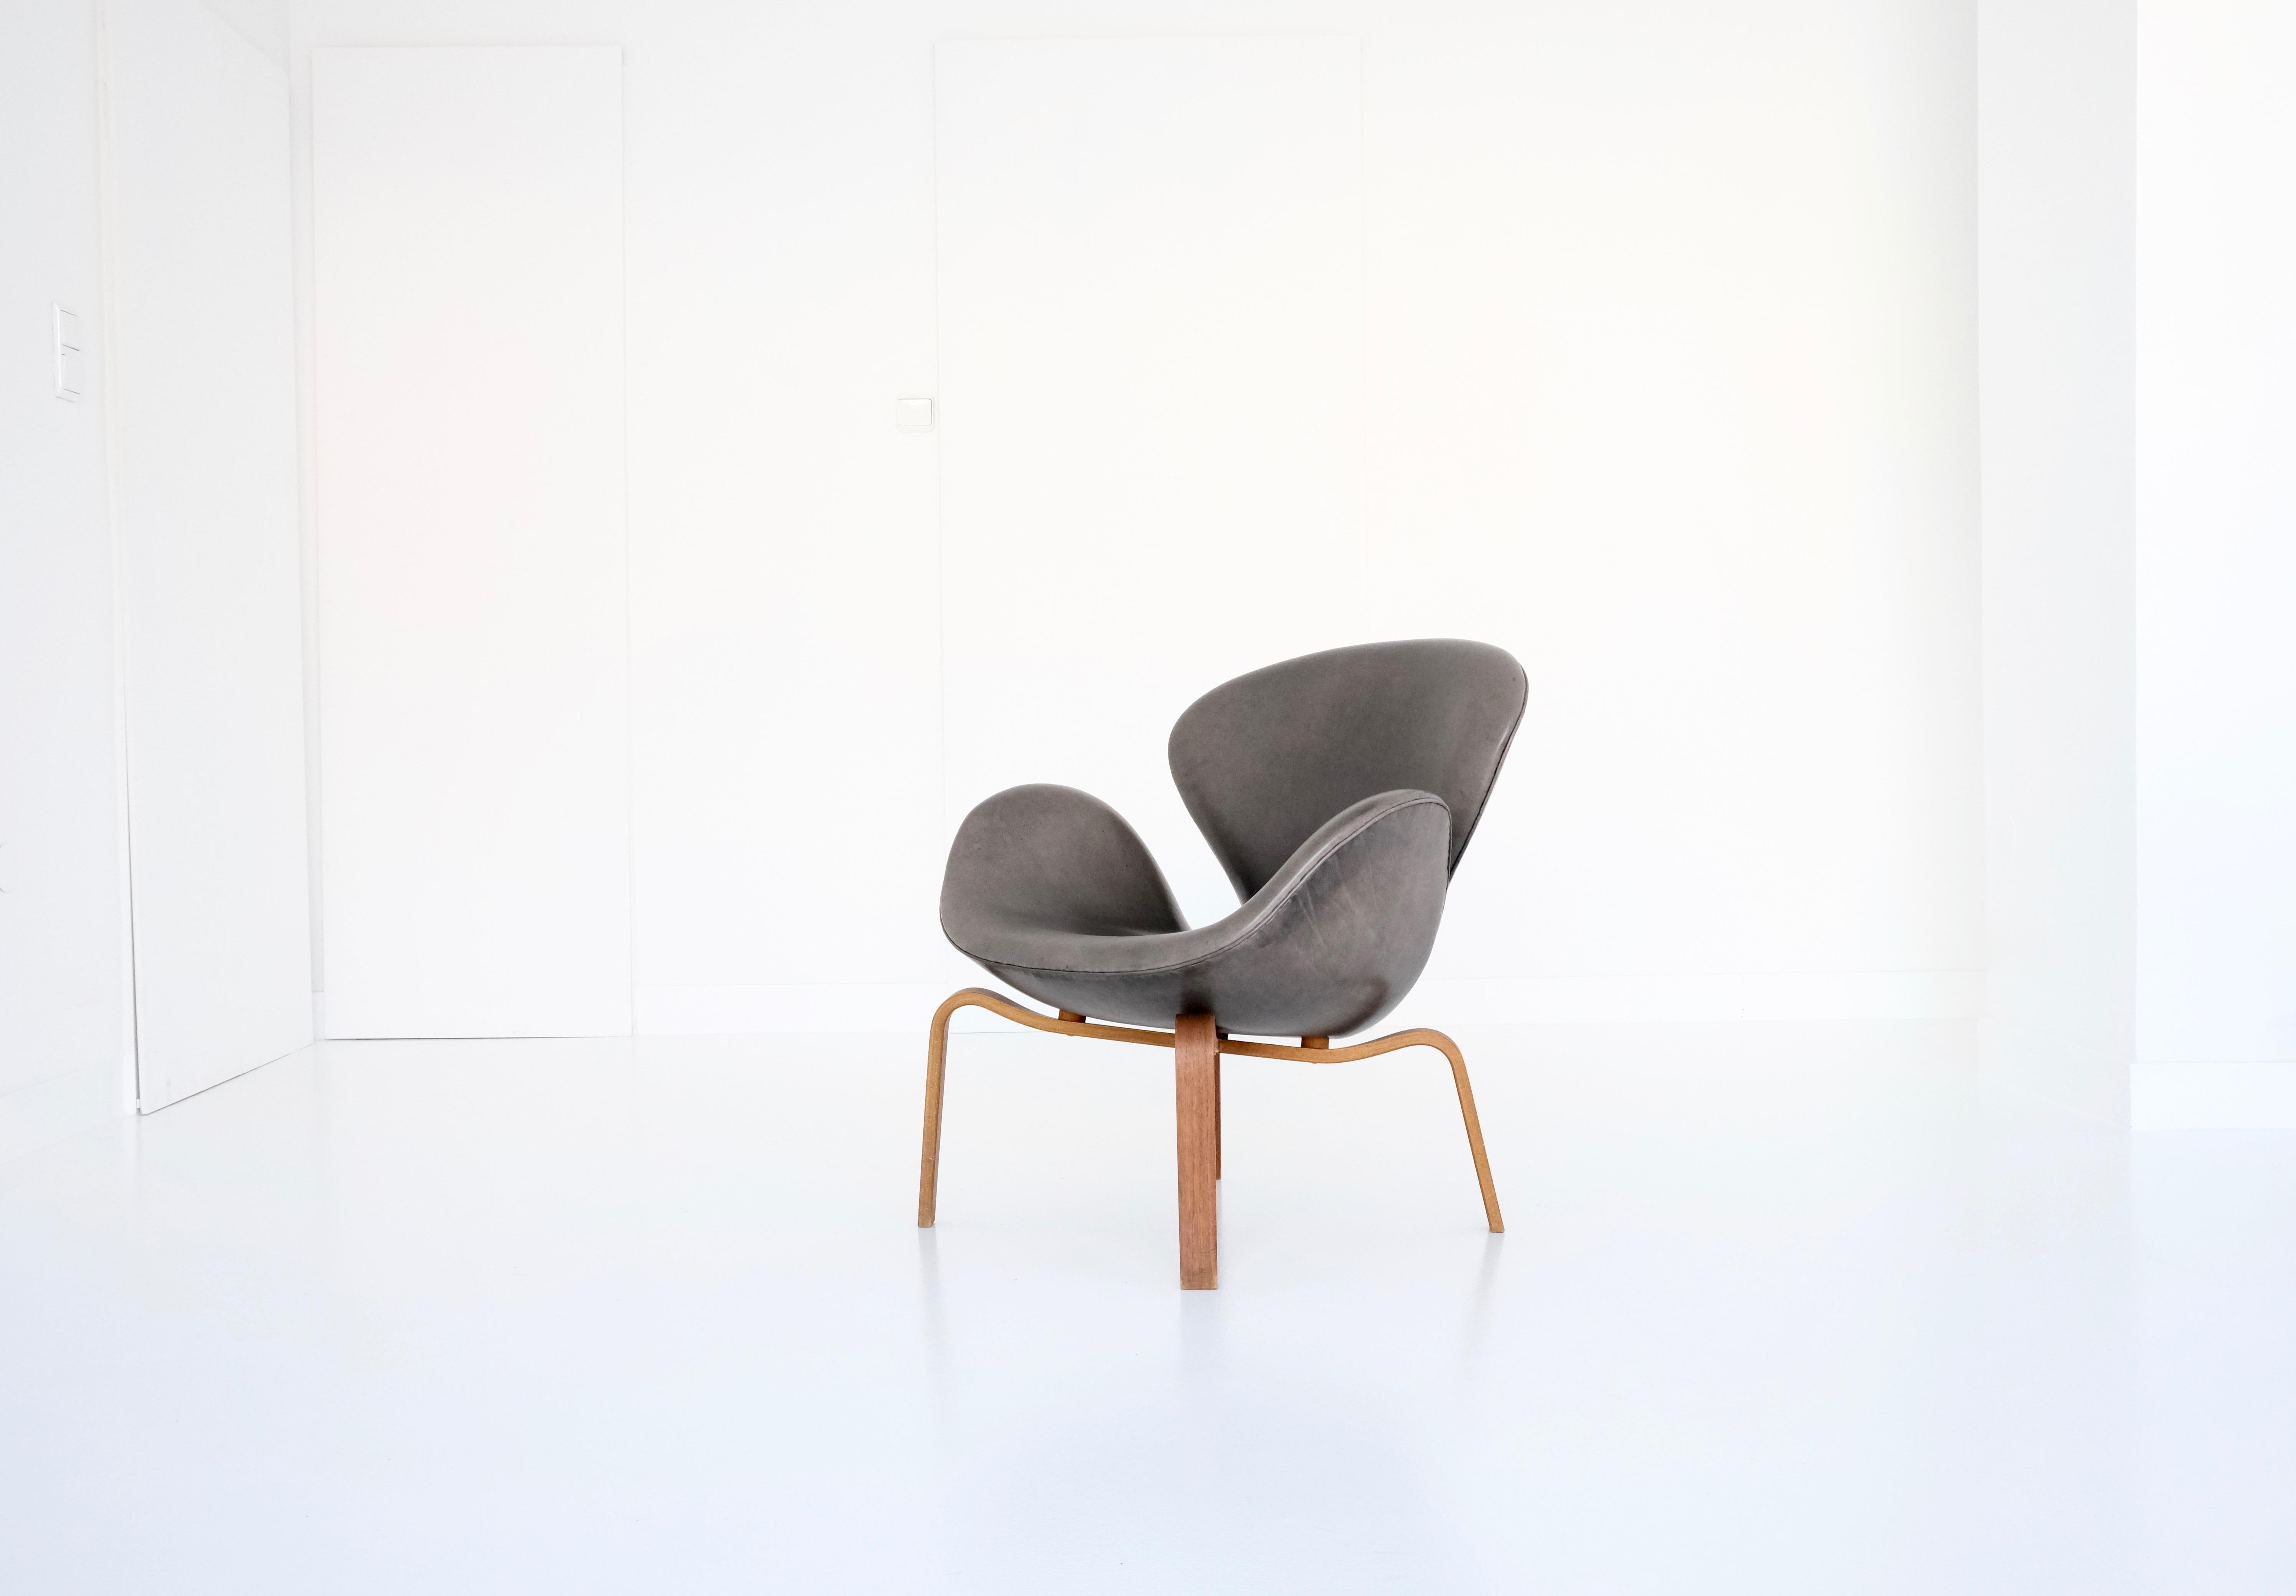 An extremely rare vintage Swan chair with a wooden frame and black leather upholstery, bleached by sunlight to a beautiful, deep and warm dark gray. While the ’swan series‘ is still in production today by Fritz Hansen, Denmark, the „wooden version“